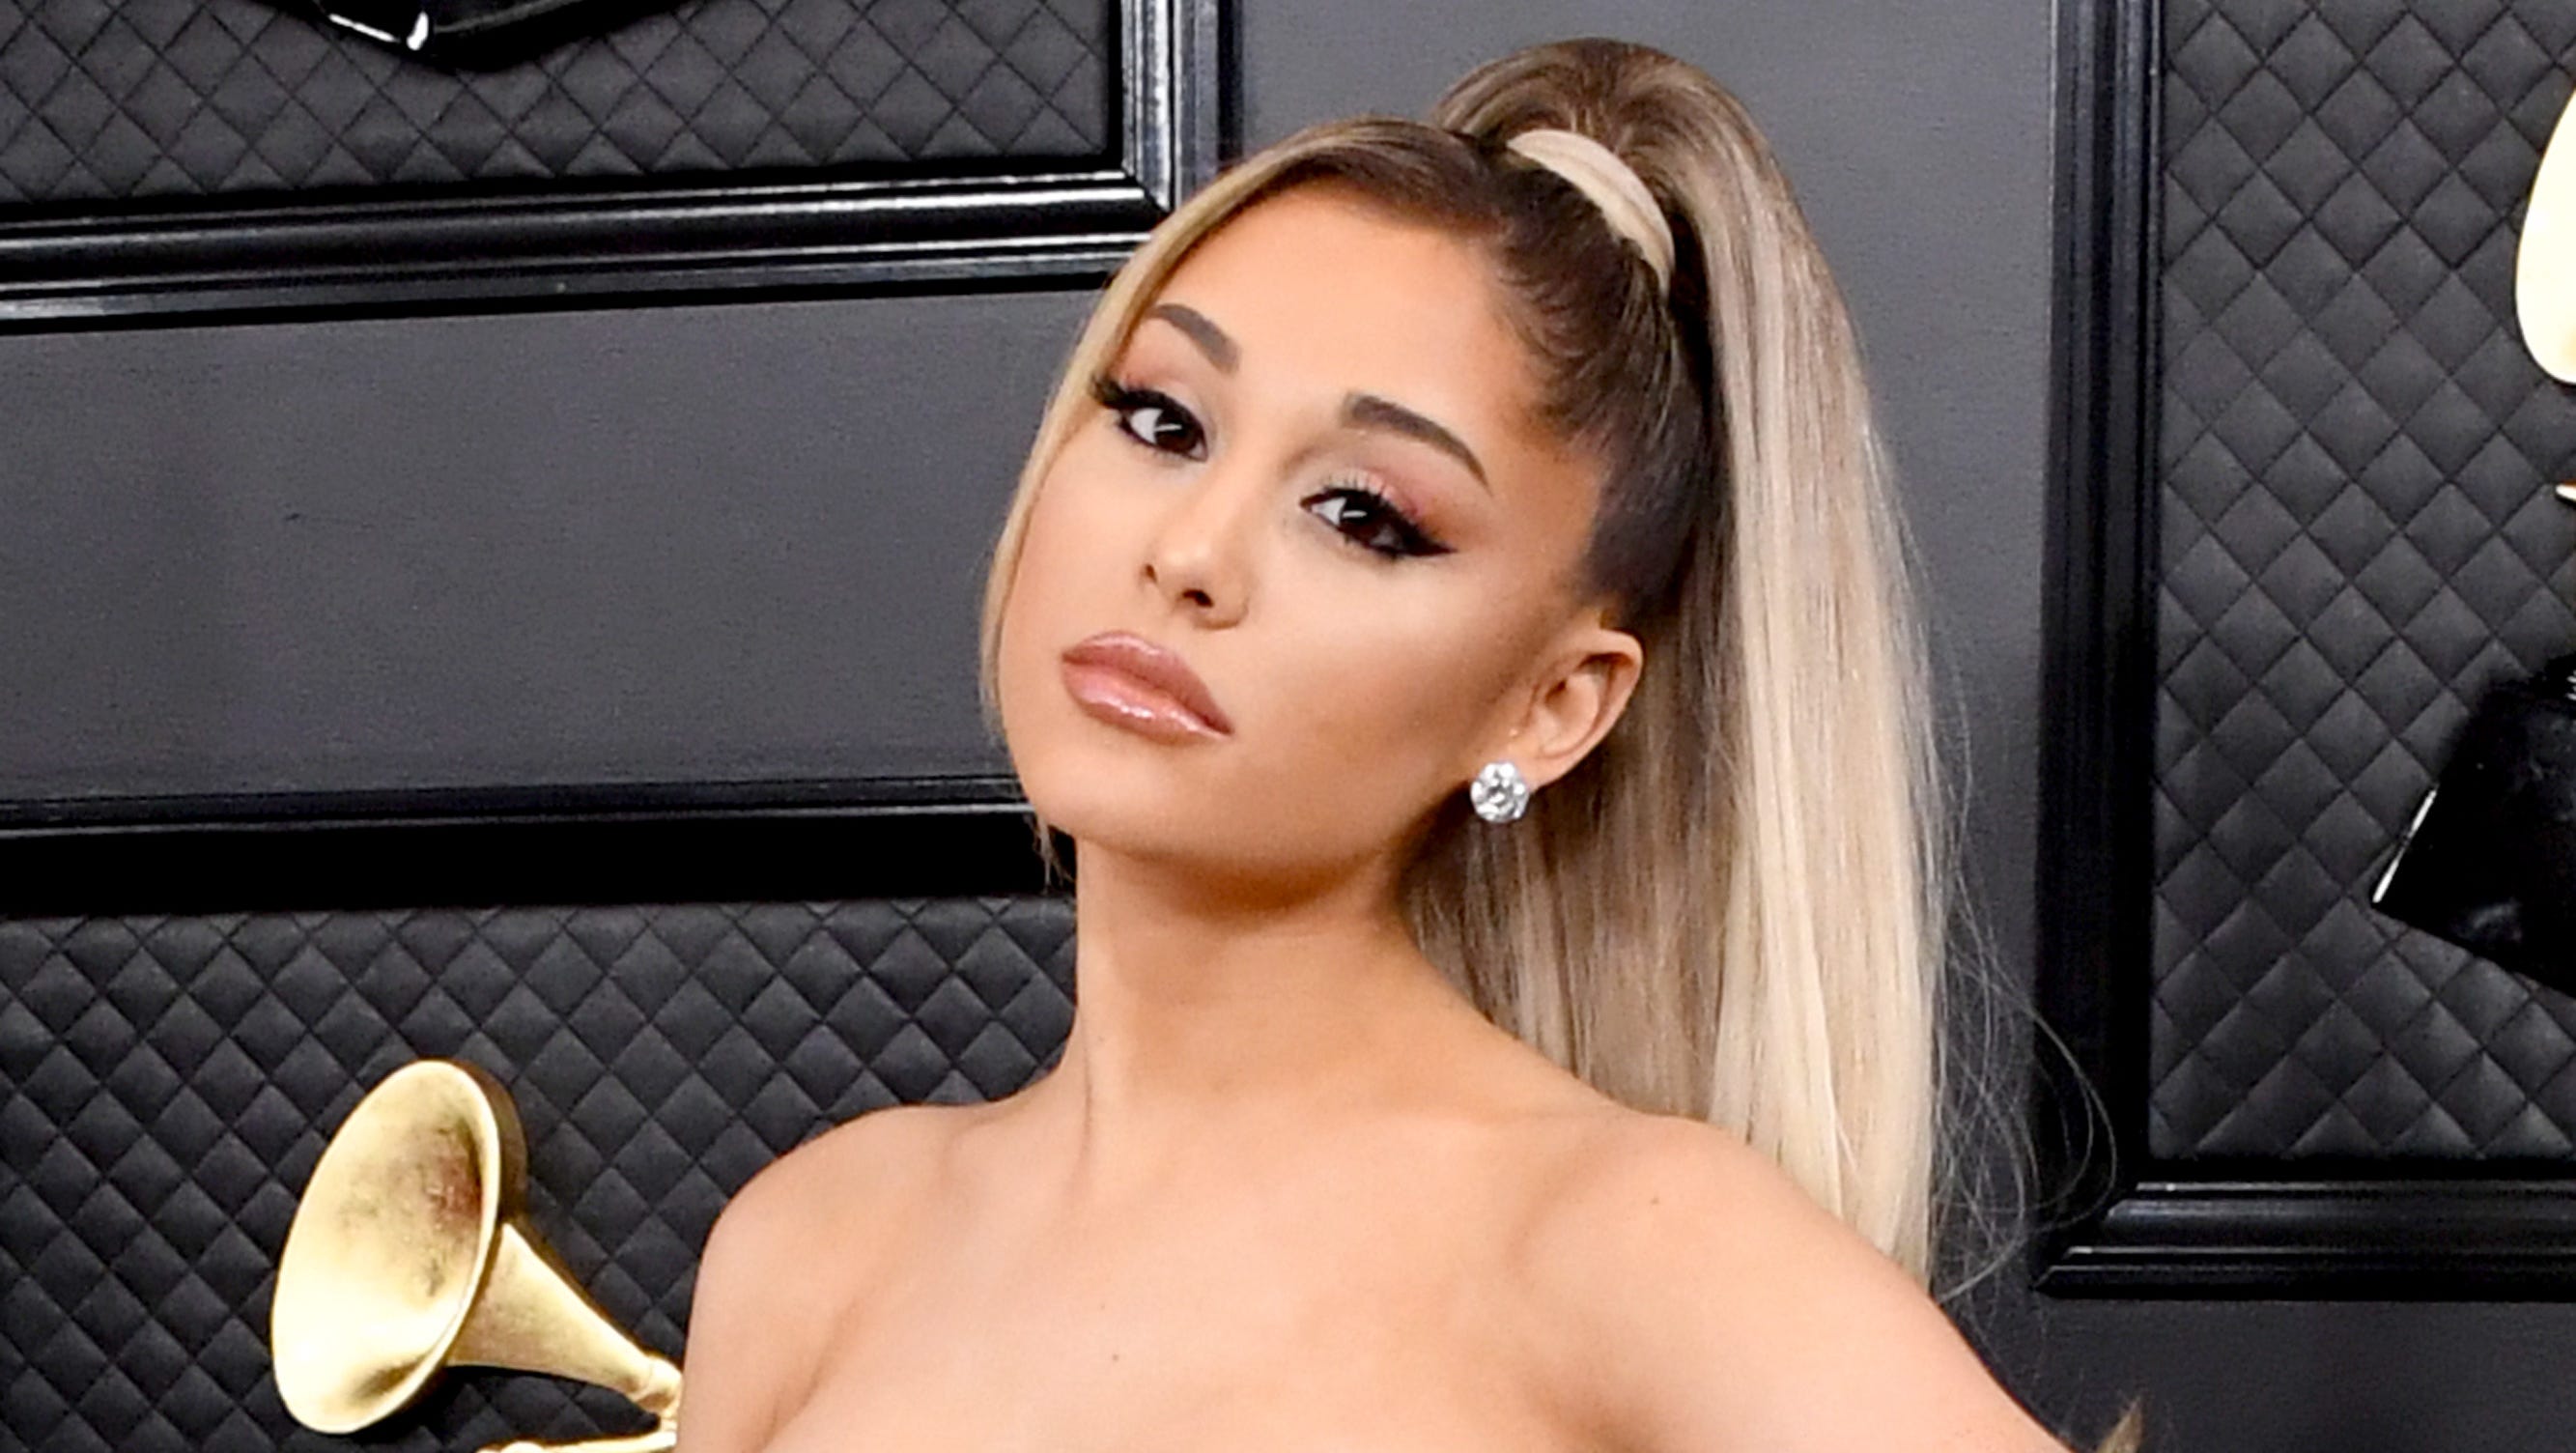 claudine moses recommends ariana grande sex movie pic